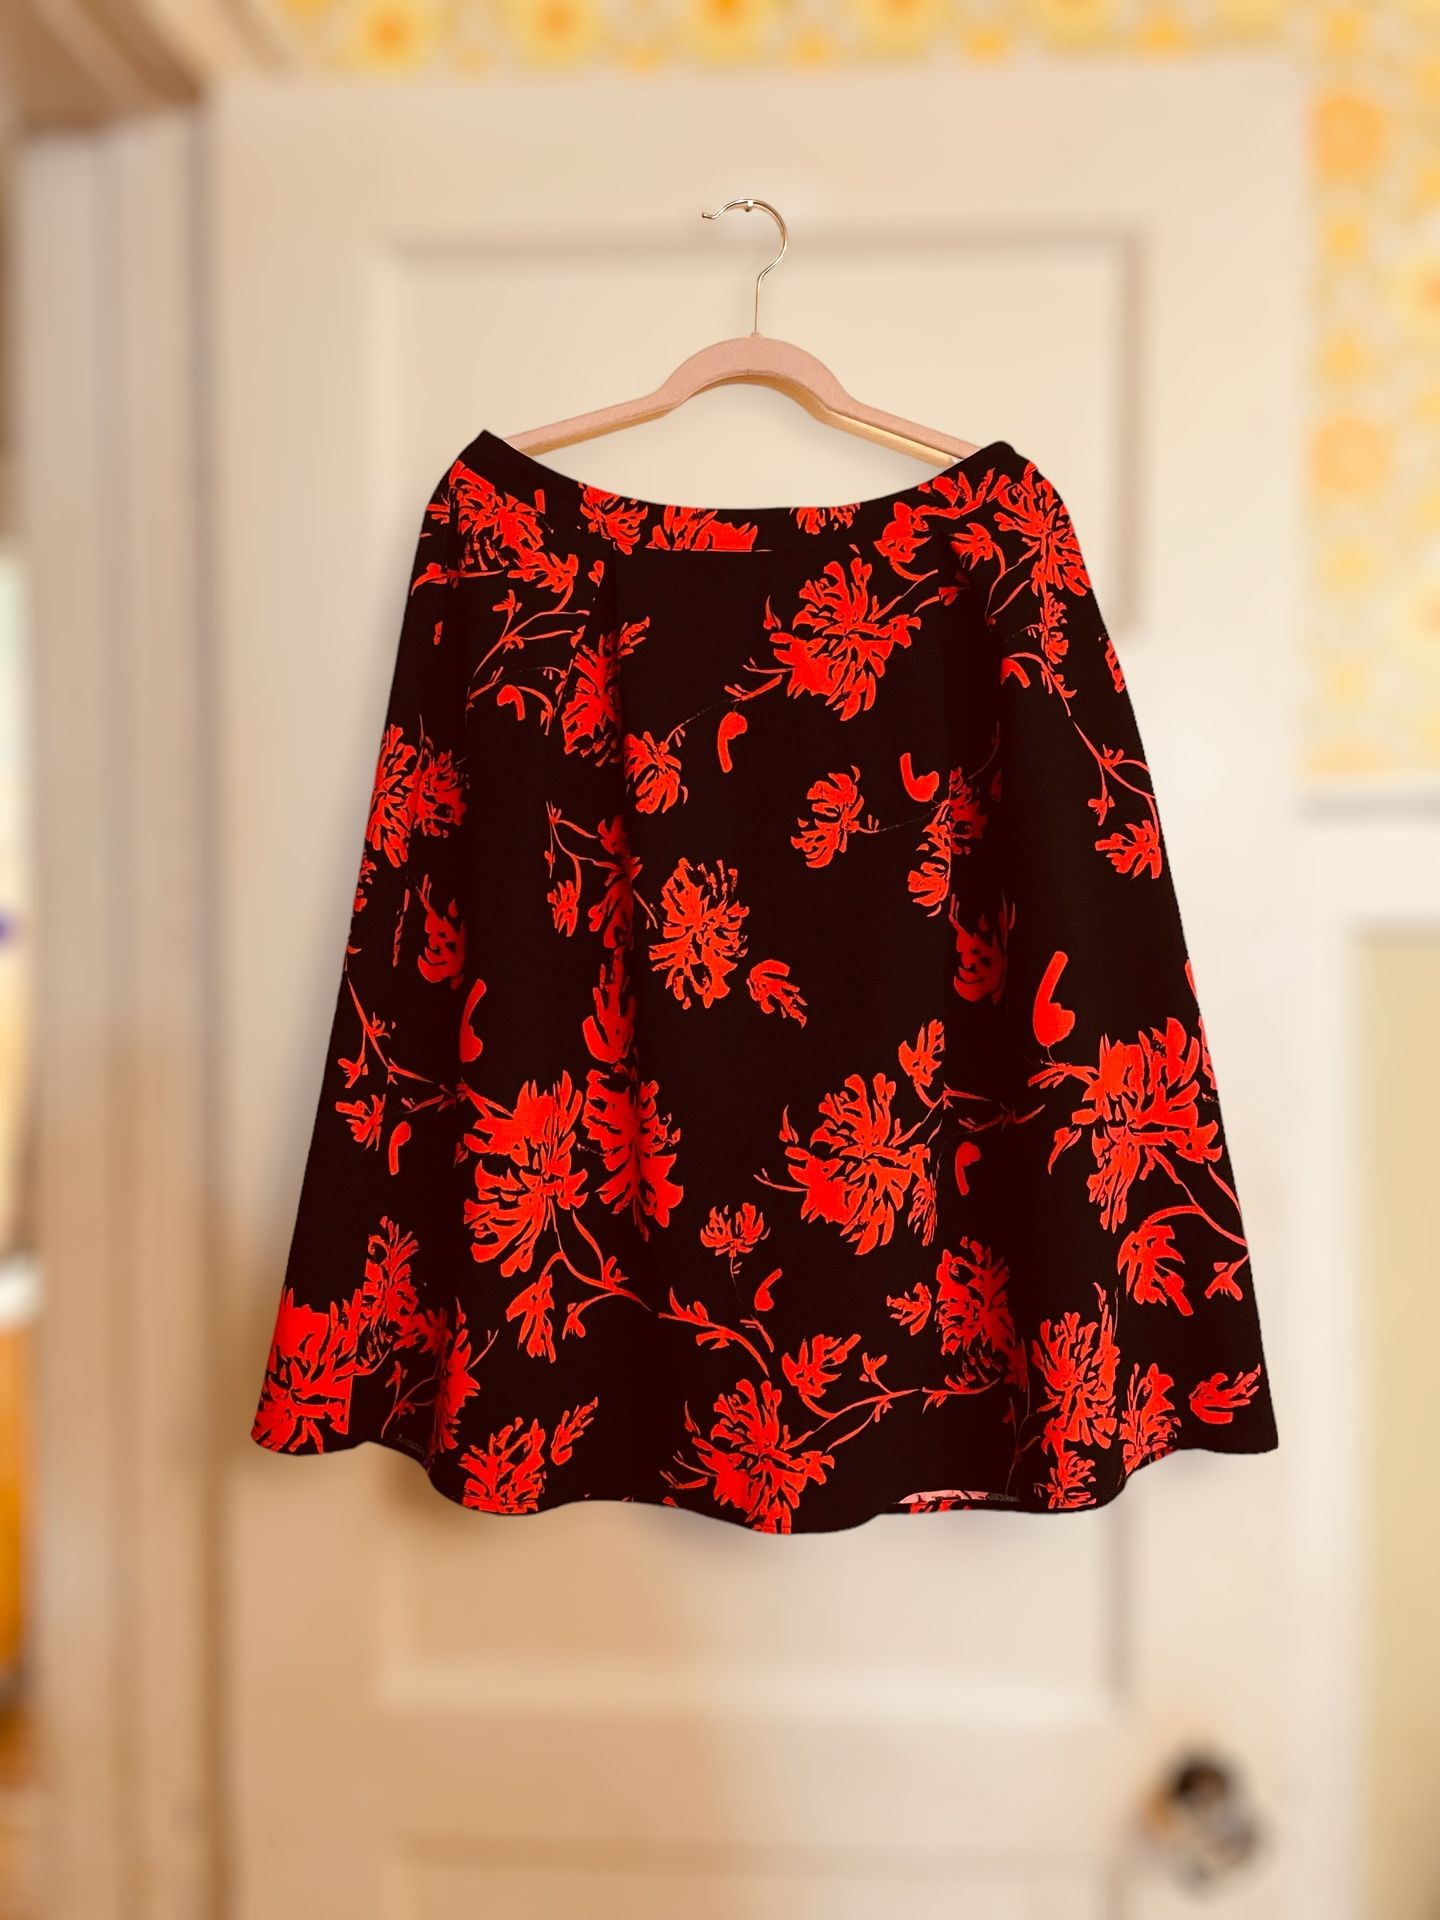 Who What Wear Women’s Size 8 Black Asian Red Floral Skirt •Pleated Side Zip NWOT